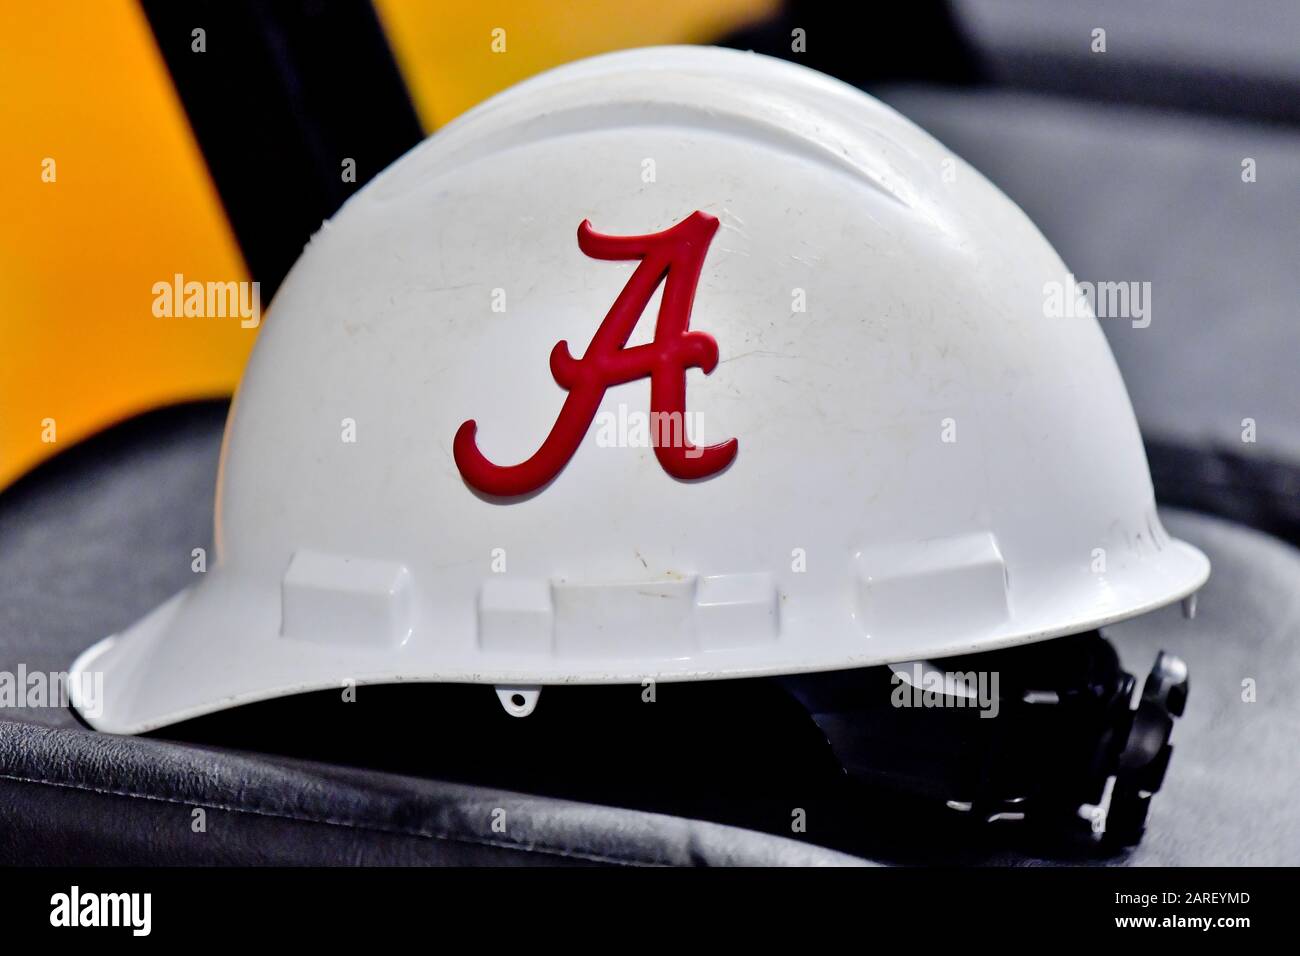 An Alabama Crimson Tide logo court side on a hard hat prior to an NCAA SEC basketball game between the Vanderbilt Commodores and the Alabama Crimson Tide at Memorial Gym. Wednesday, Jan 22, 2020, in Nashville. (Photo by IOS/ESPA-Images) Stock Photo